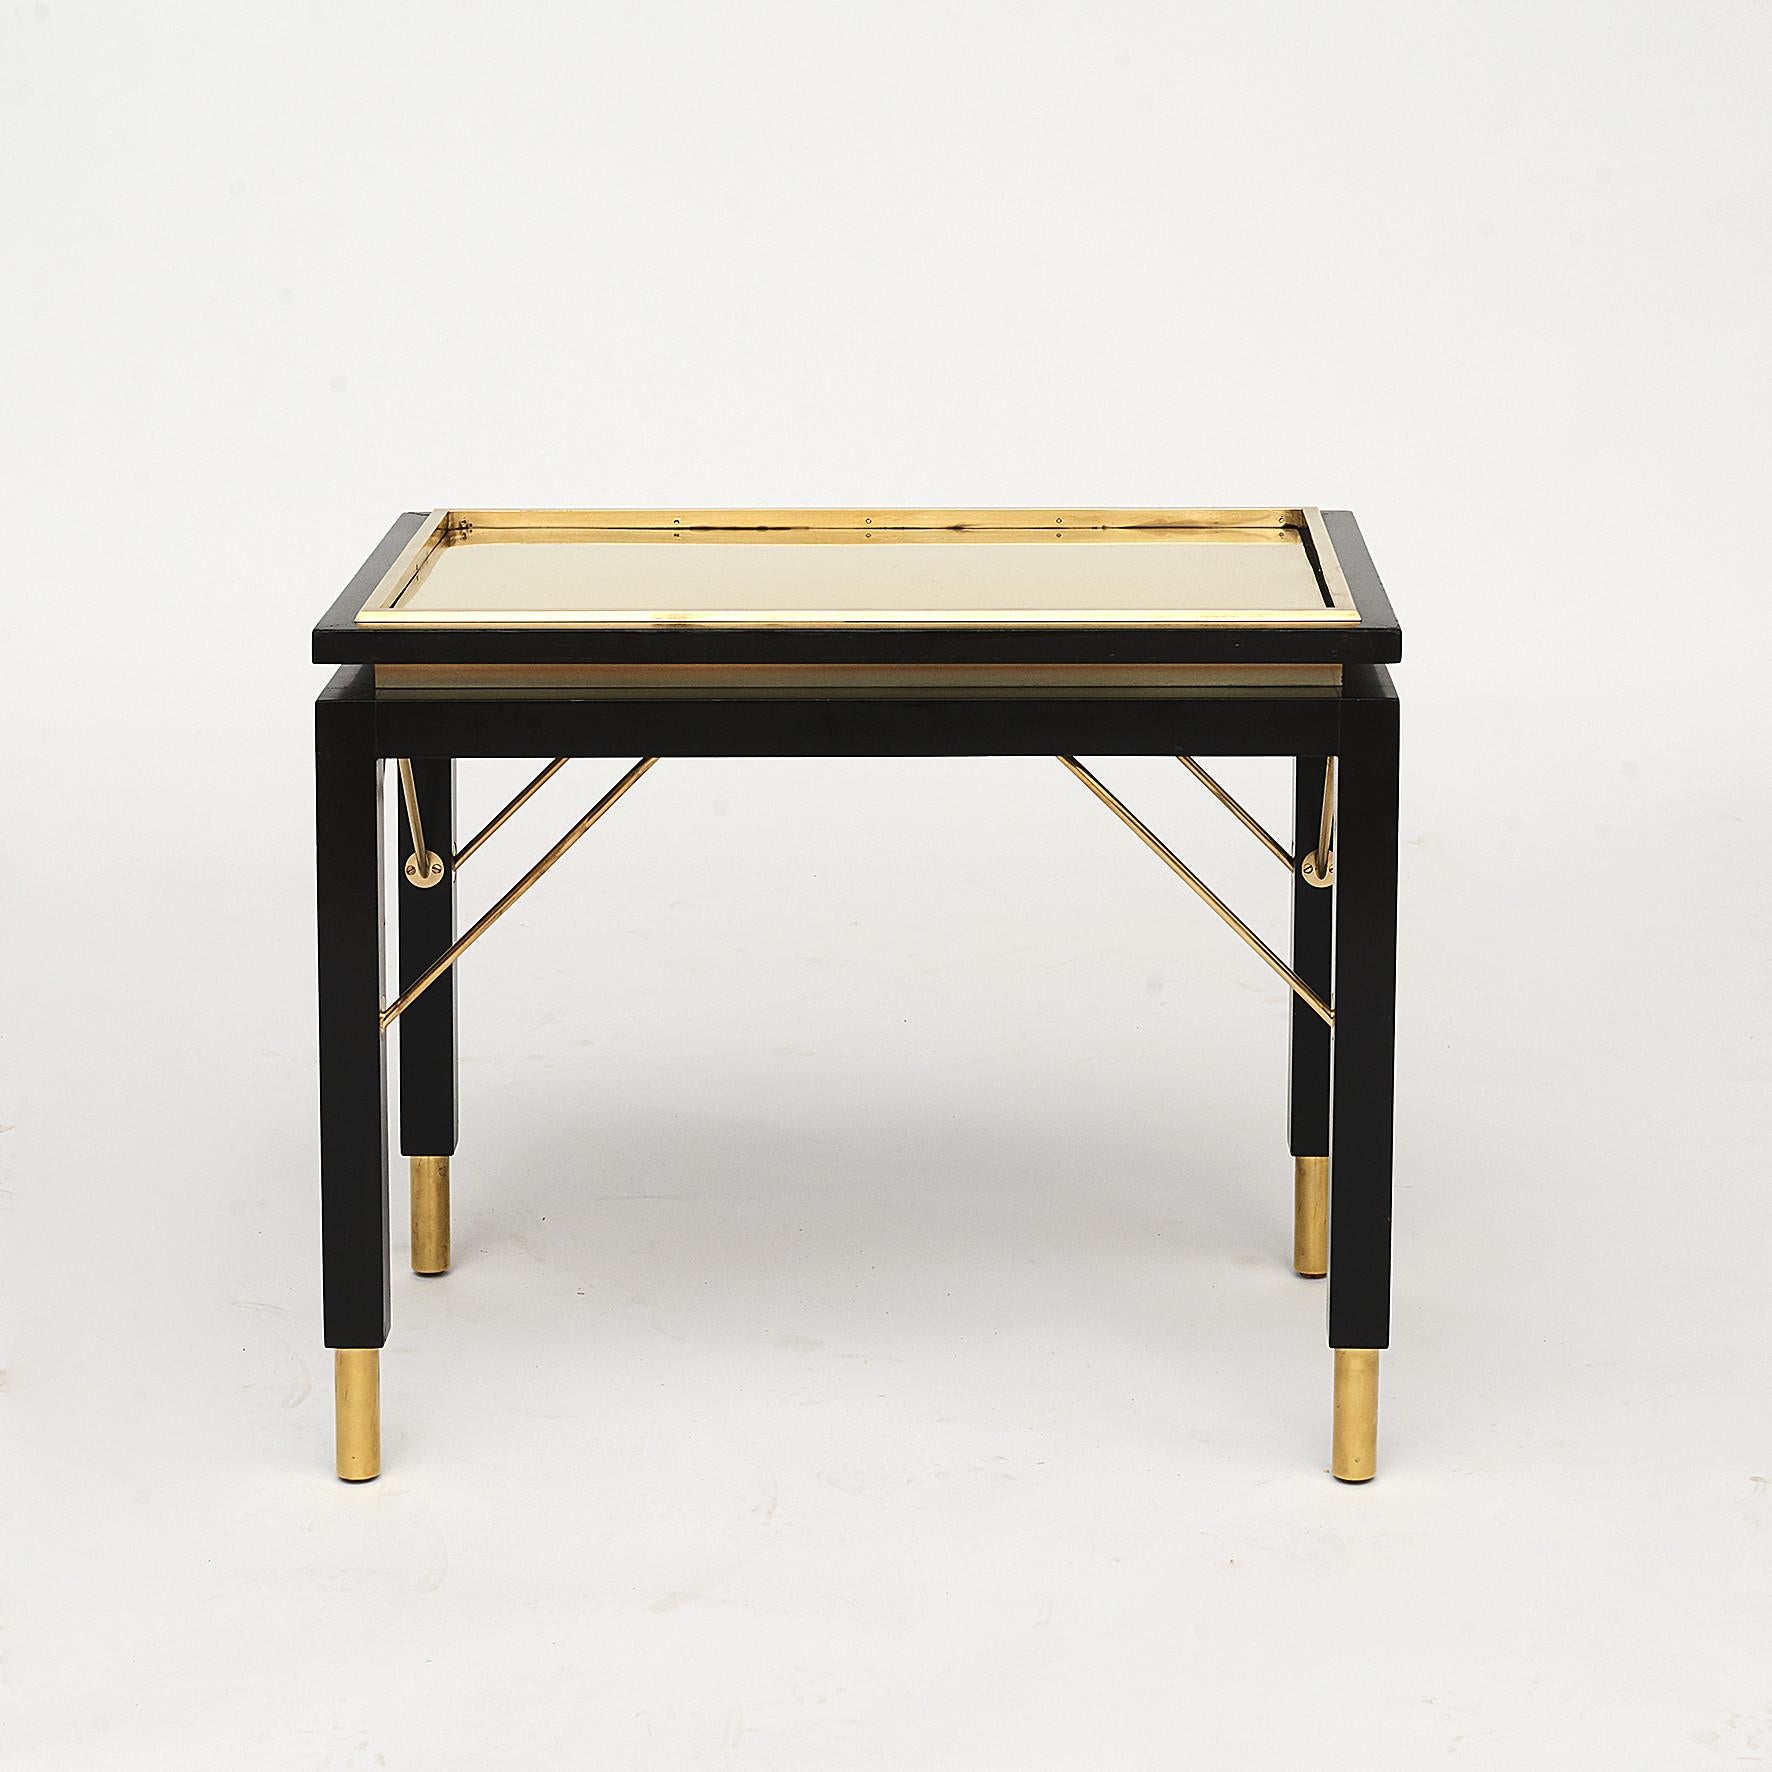 Pair of Italian brass side tables on black polished wooden frame with brass feet. Top with fixed edge and removable top plate,
Italy, 1950-1955.
Sold as a pair.
A sophisticated and timeless piece that will bring a contemporary twist to any